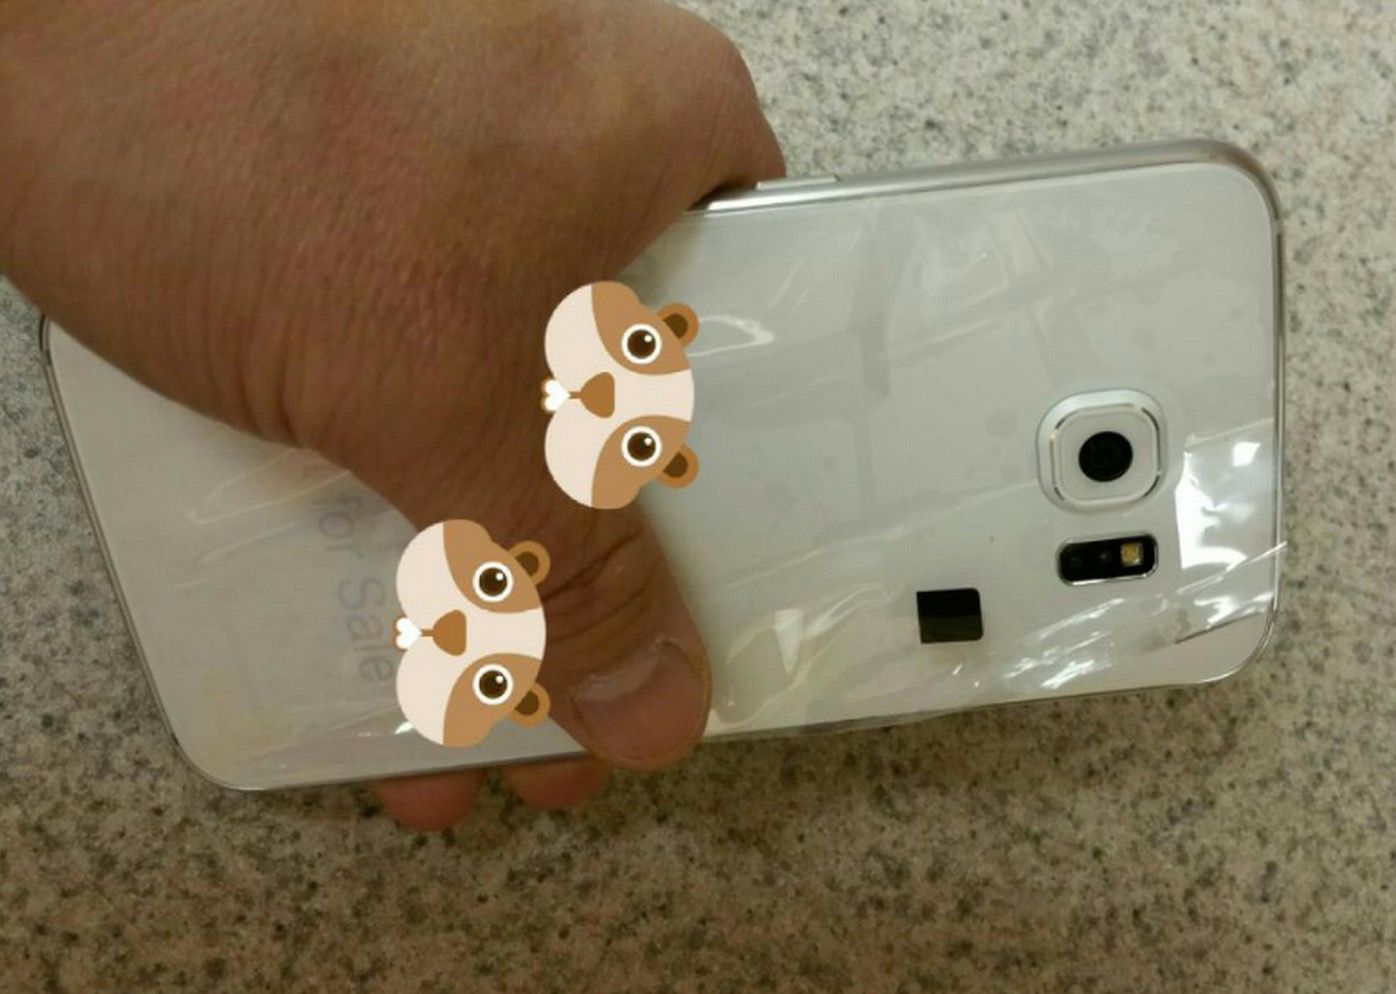 is this the real samsung galaxy s6 or a prototype  image 1